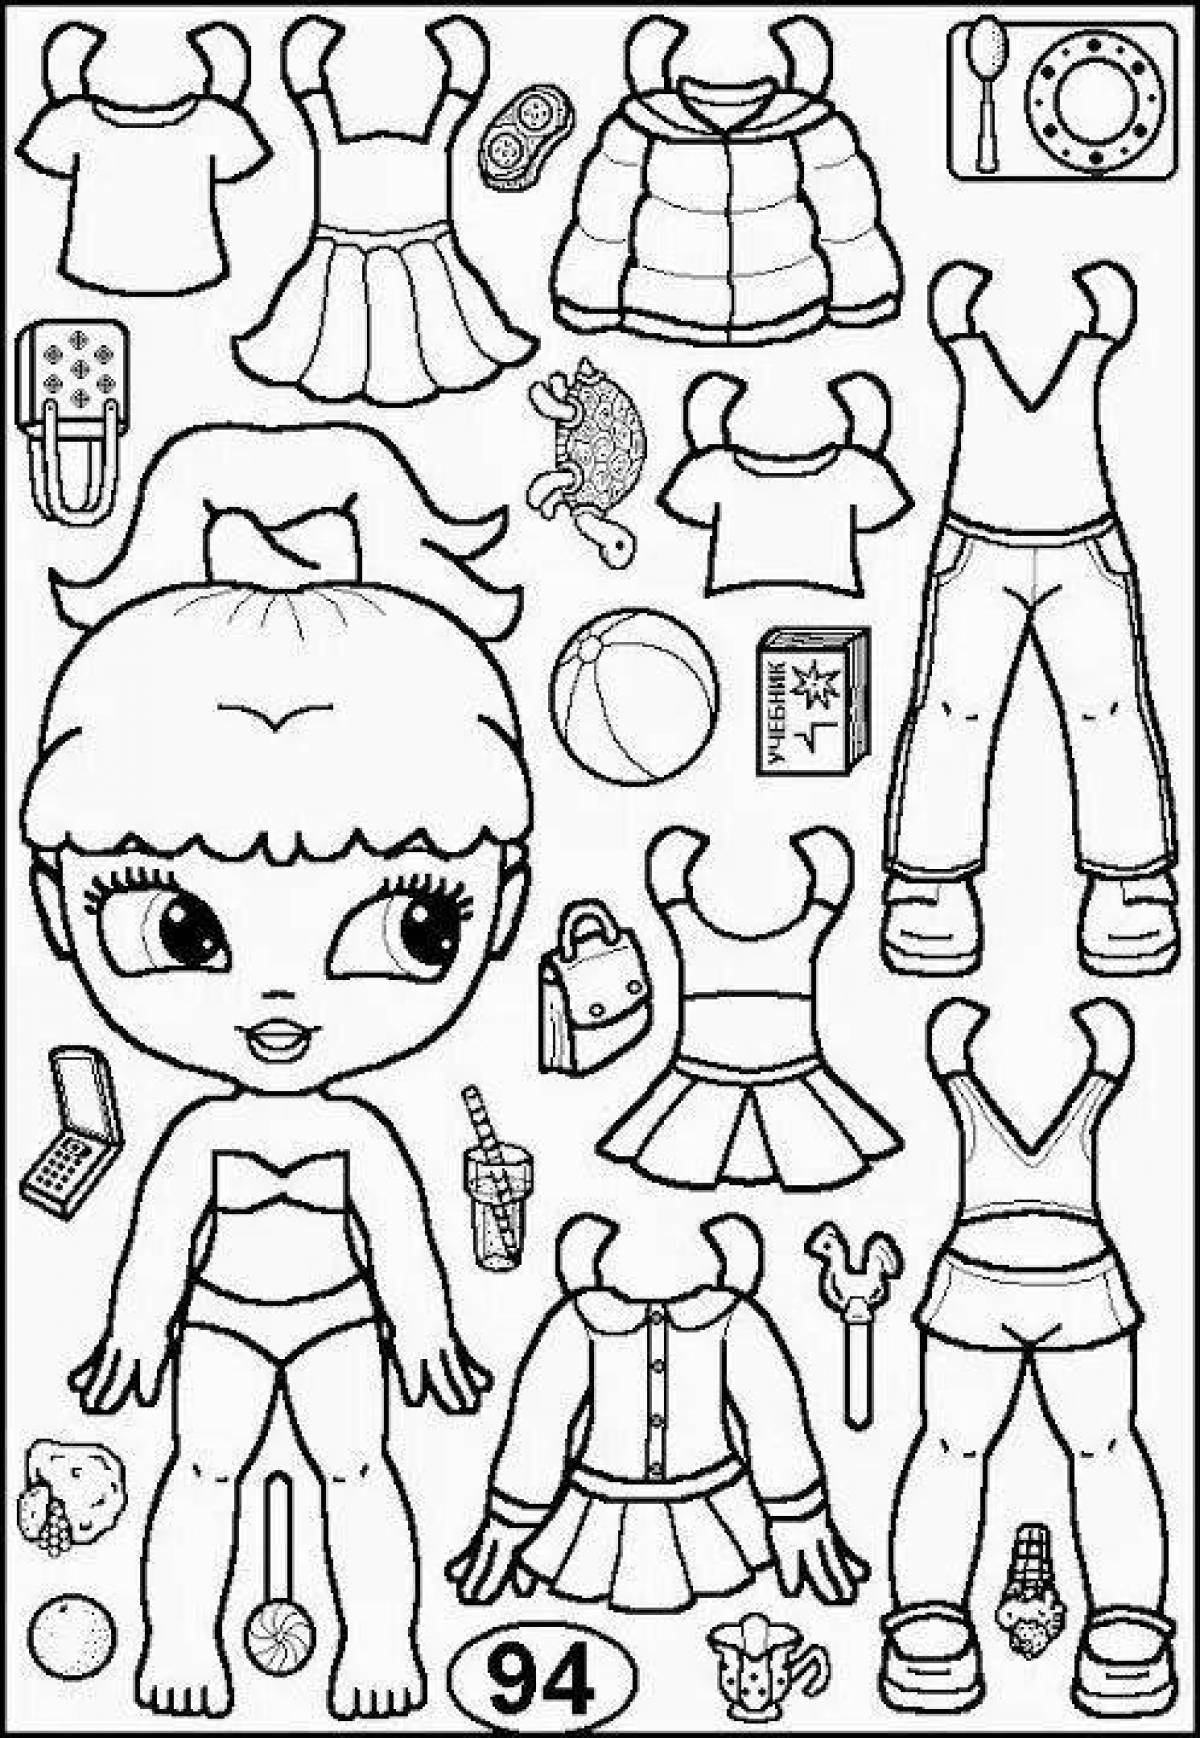 Incredible doll with clothes coloring book